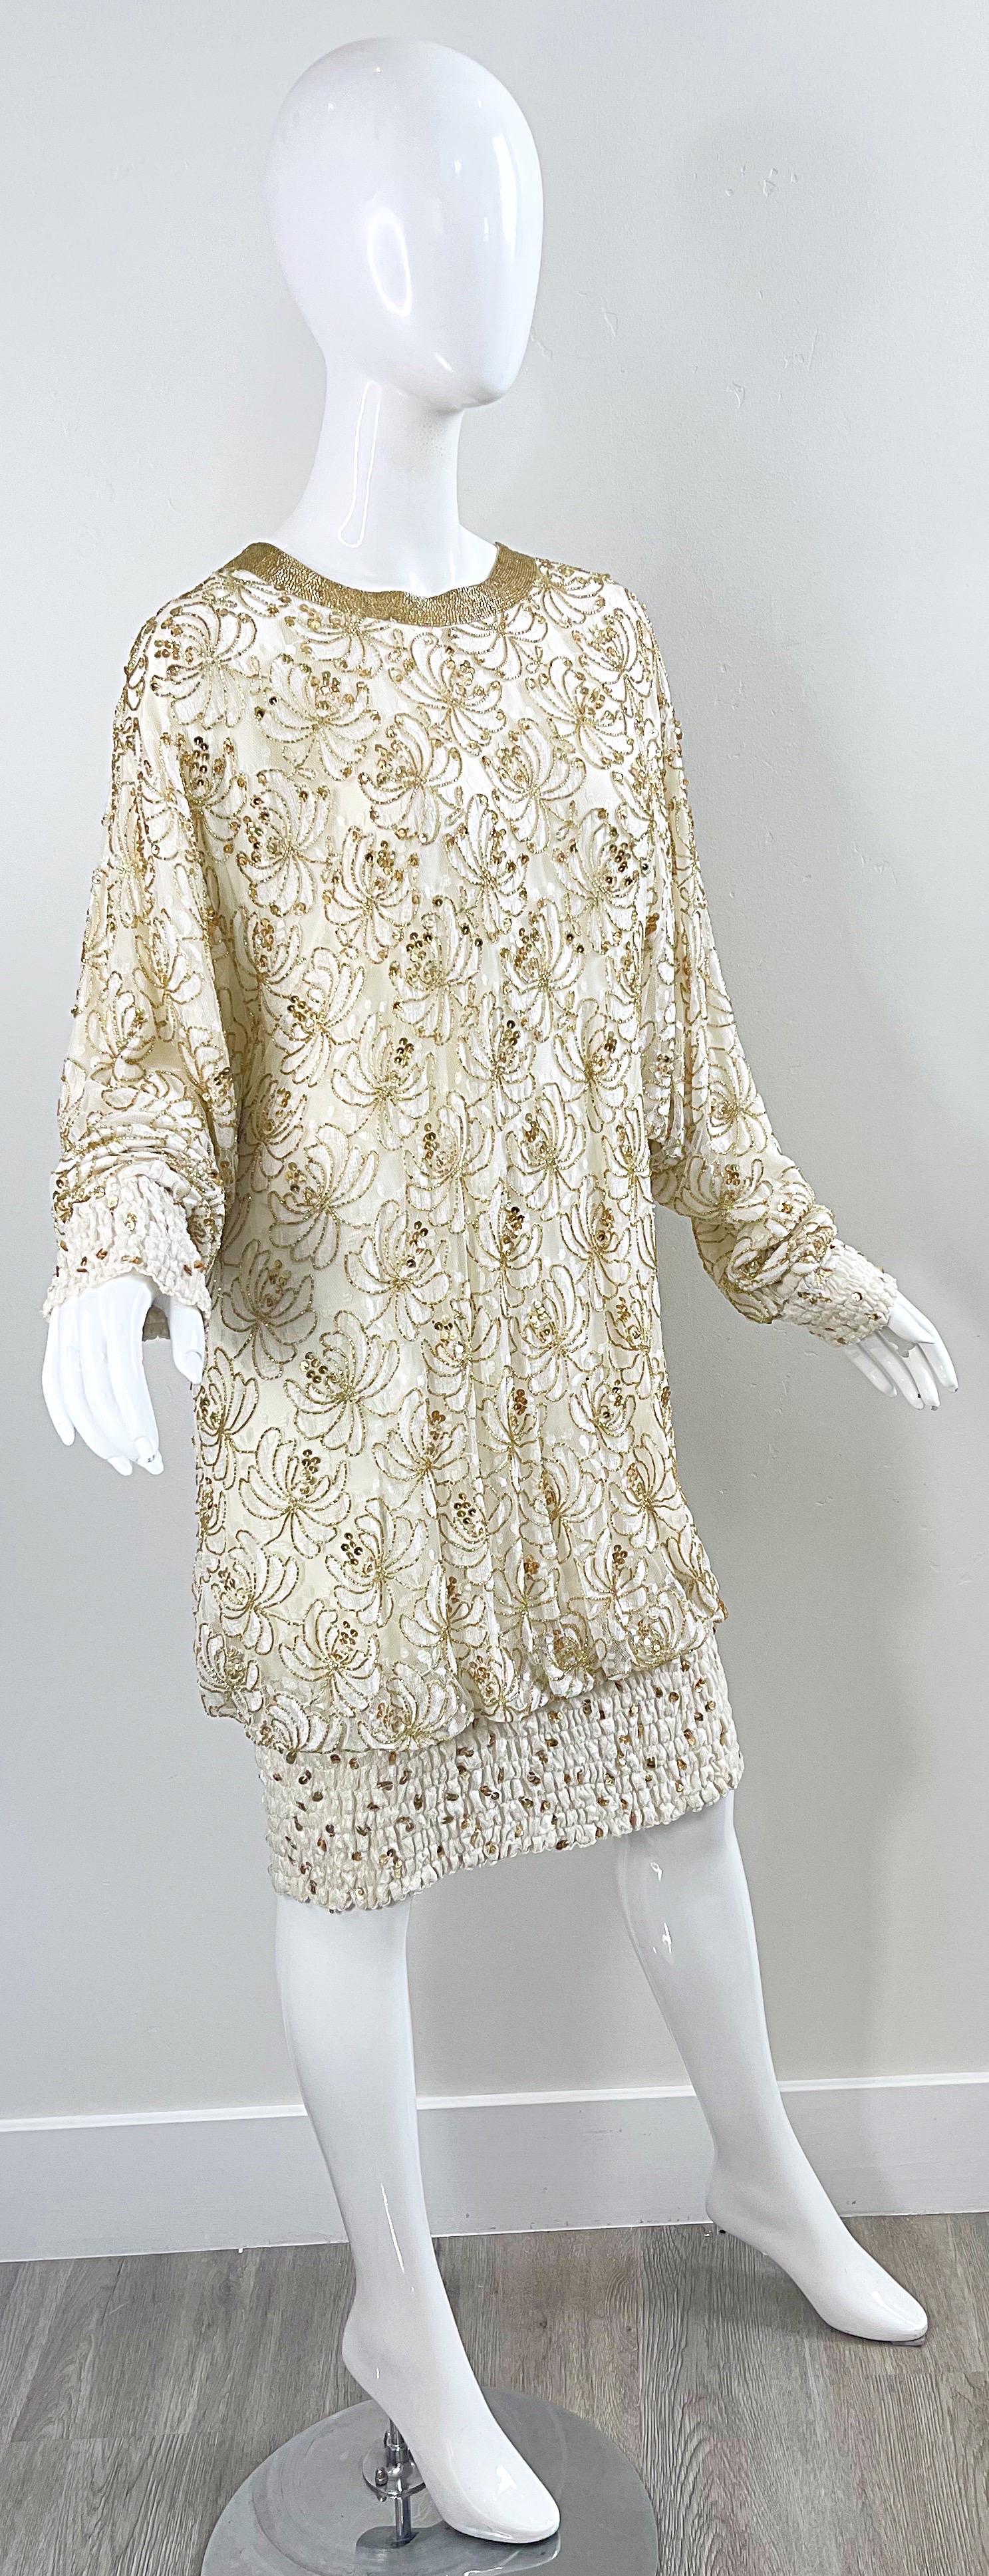 Lillie Rubin 1980s Ivory Off White + Gold Lace Sequin Beaded Vintage 80s Dress For Sale 6